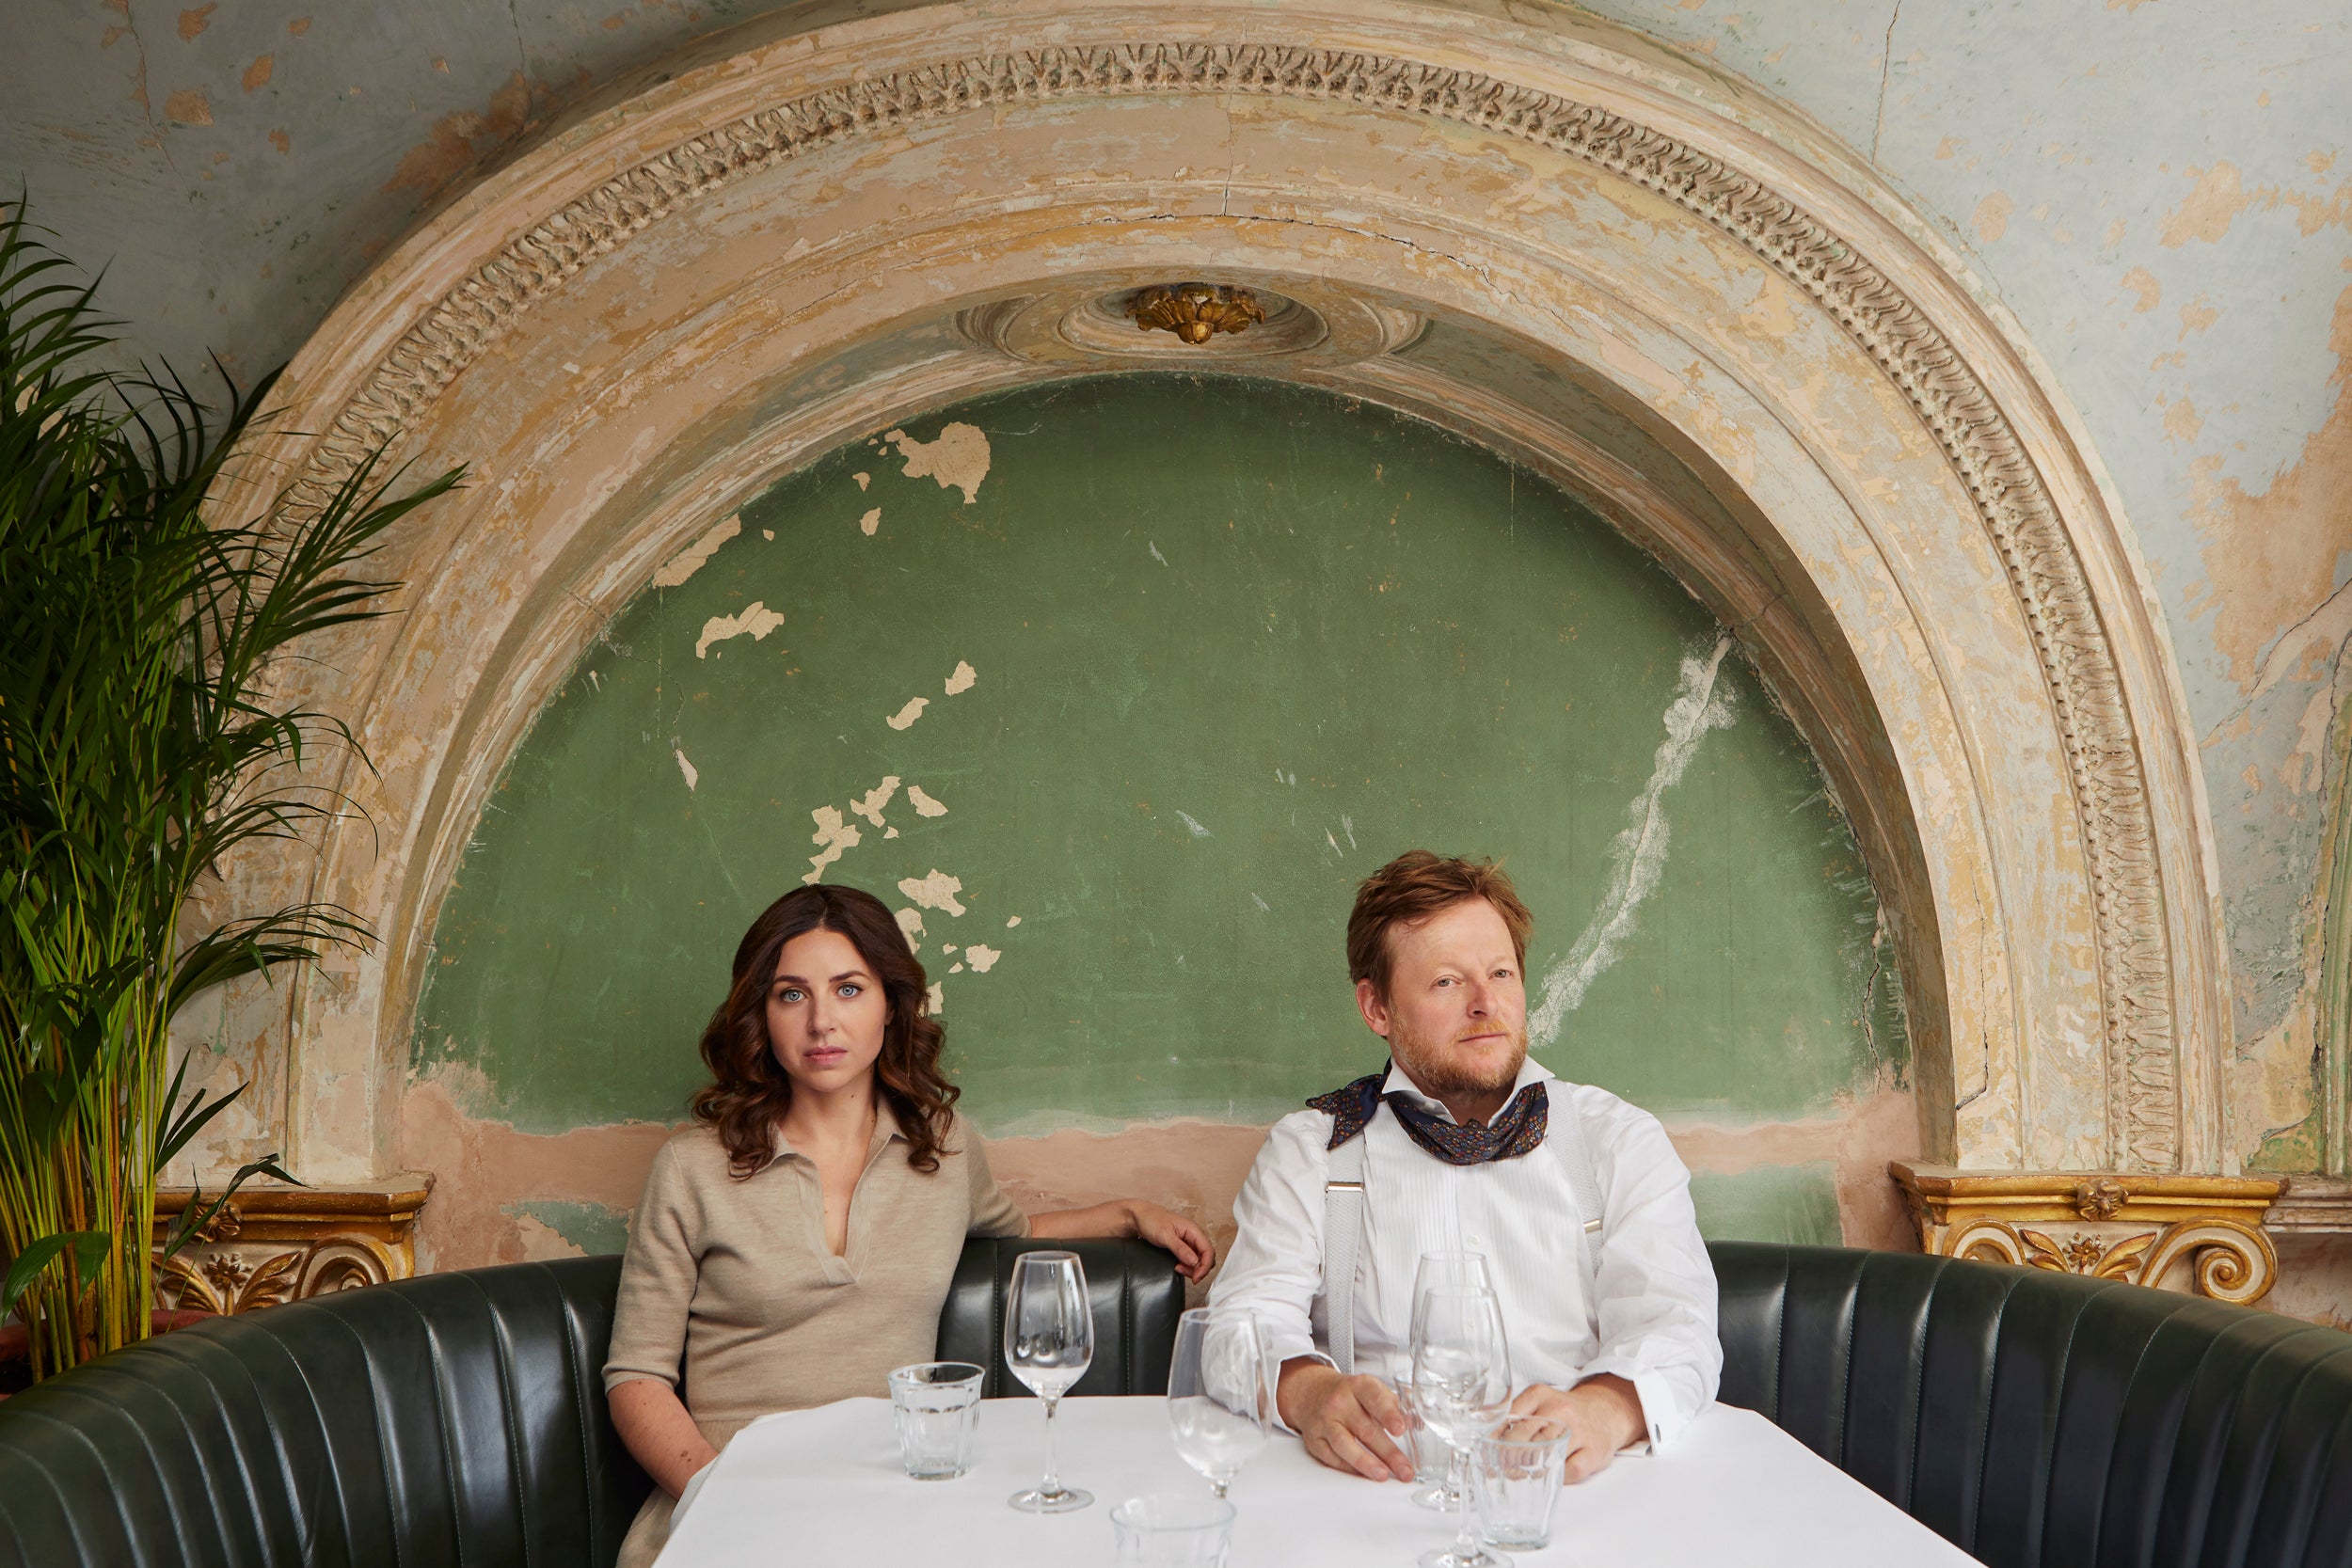 Florence Knight (left) and Jonny Gent (right) sit in a banquette with a white tablecloth and wine glasses, backed by a distressed green fresco with an arch